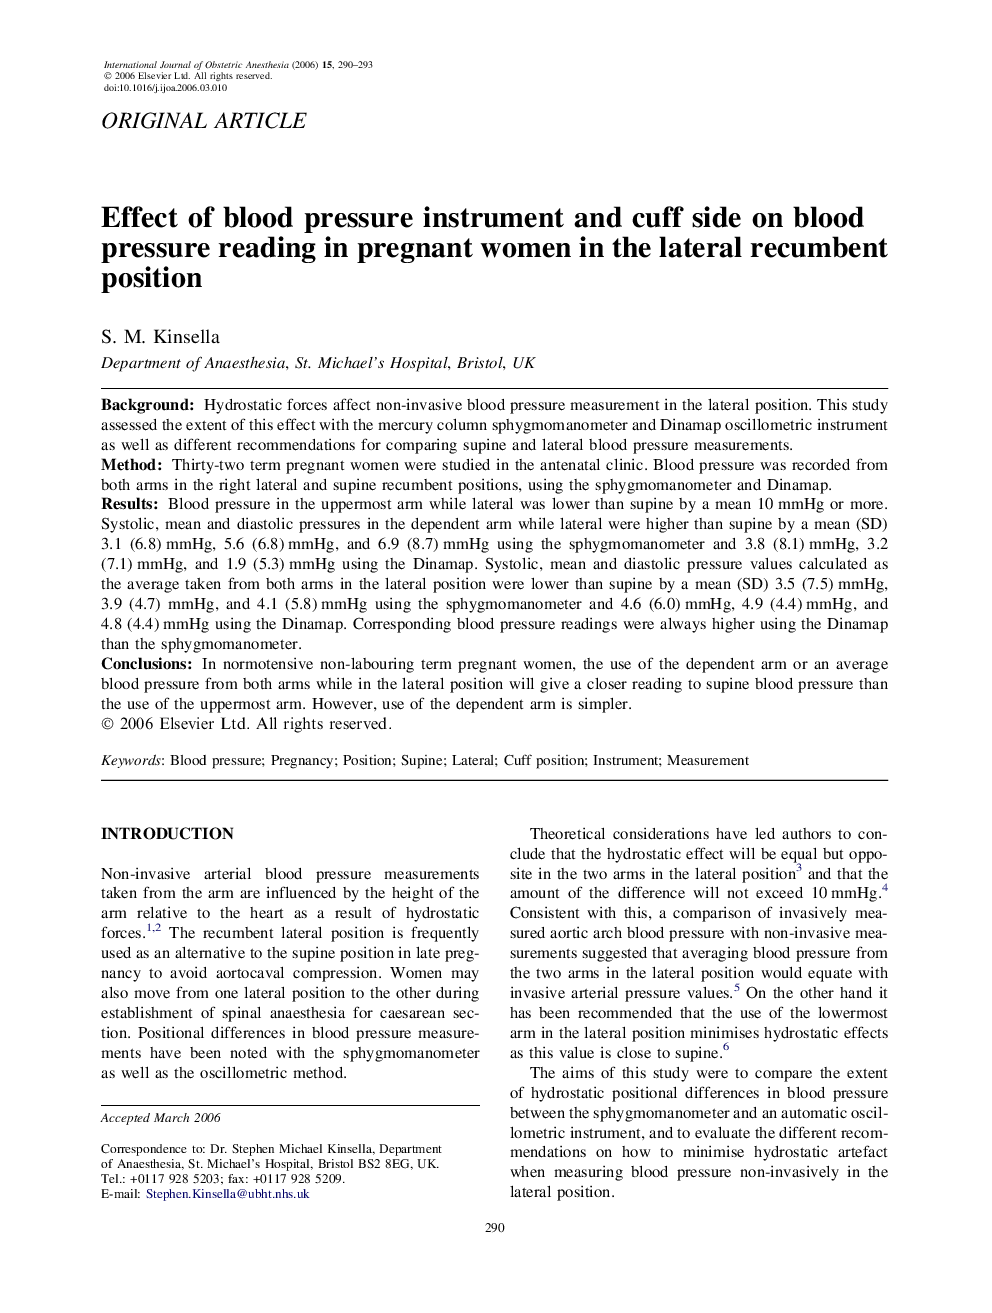 Effect of blood pressure instrument and cuff side on blood pressure reading in pregnant women in the lateral recumbent position